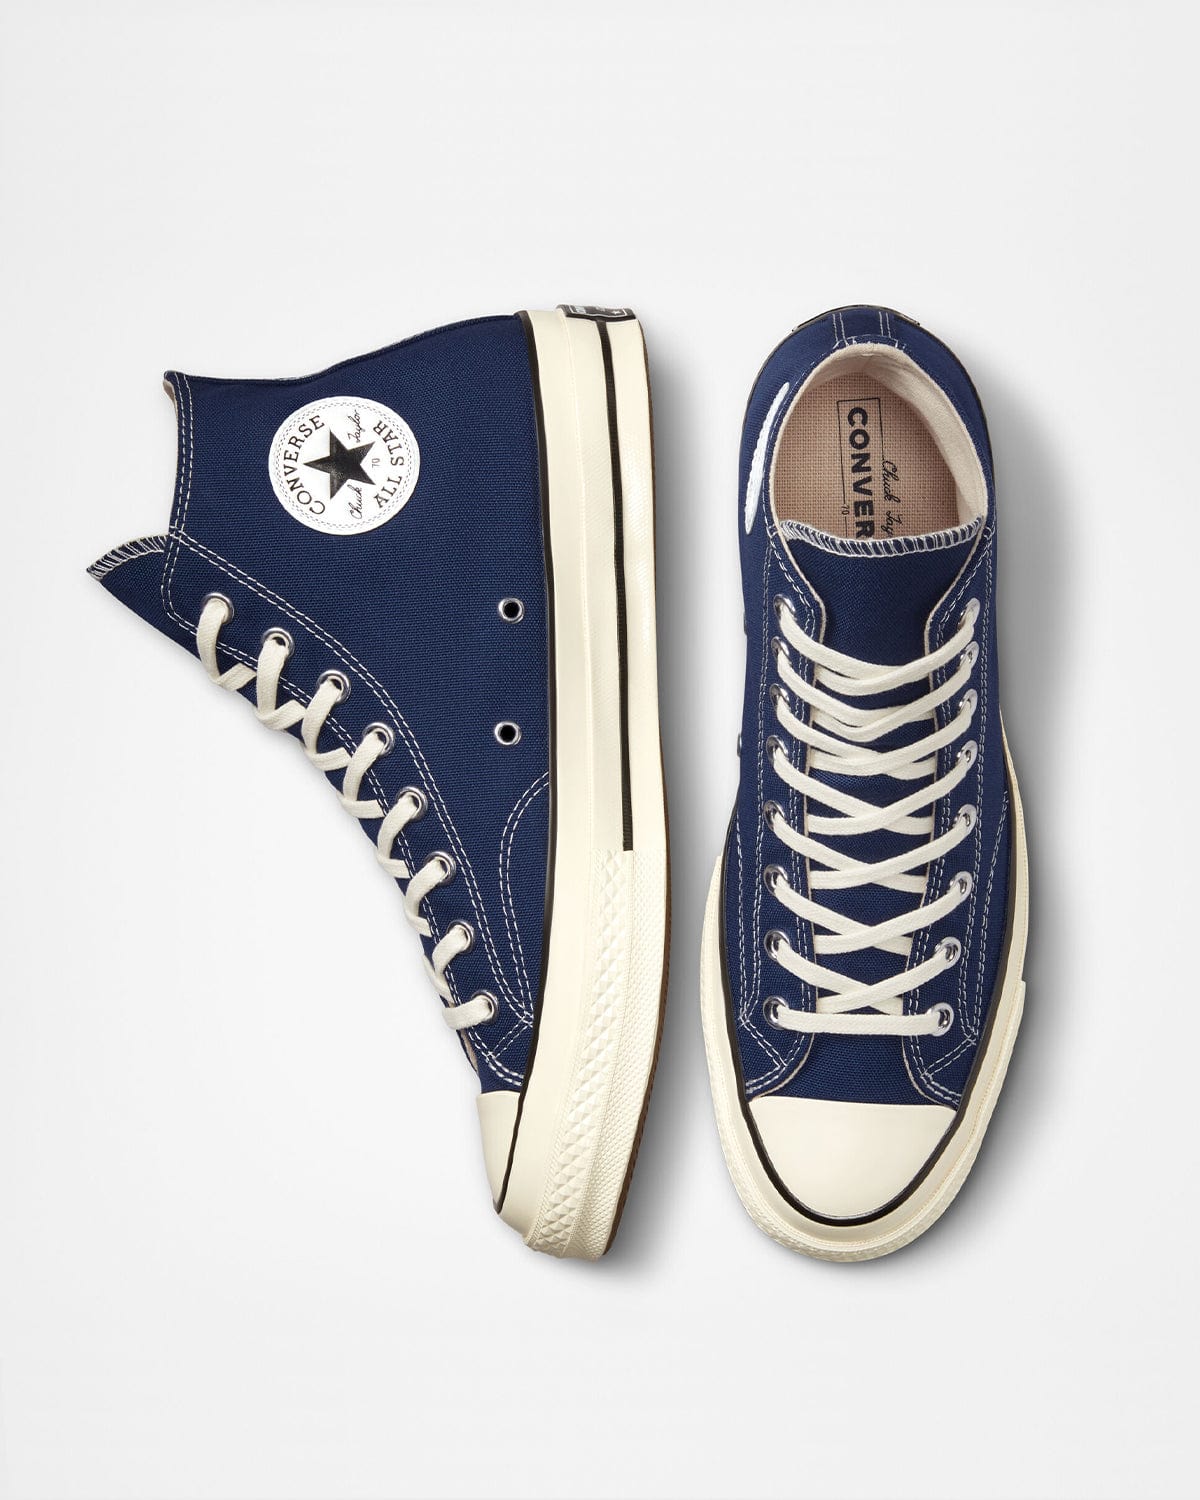 Converse Chuck 70 Hi Midnight Navy Shoes Sneakers Unisex